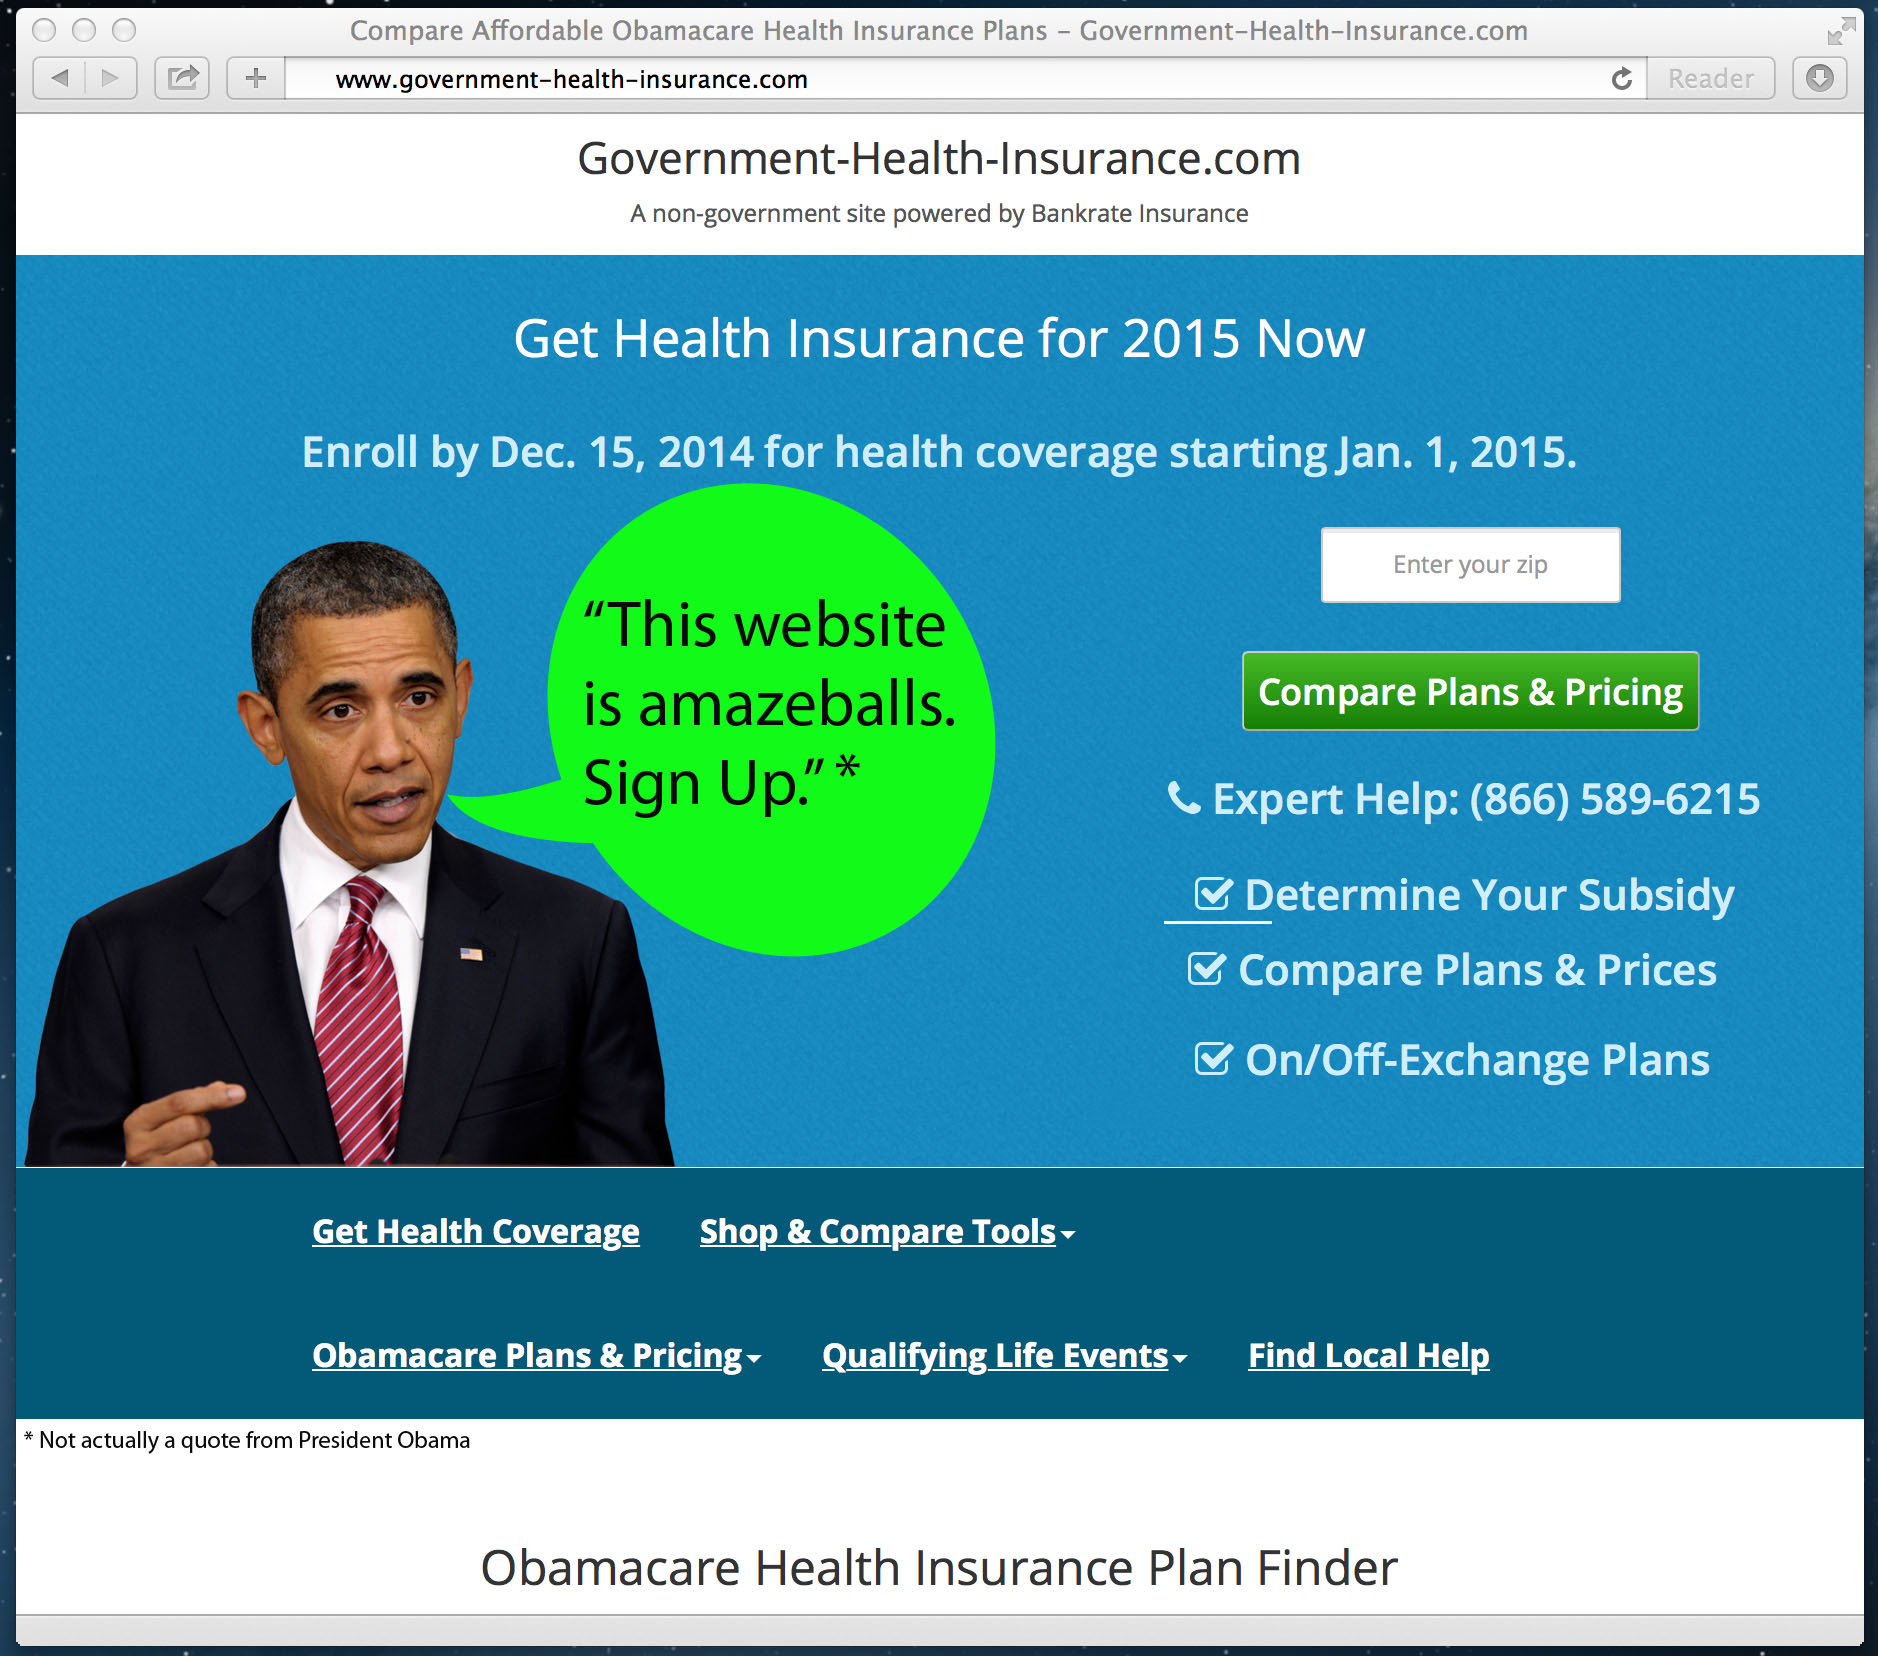 BankRate Insurance Updates Their "Shady" Obamacare Site